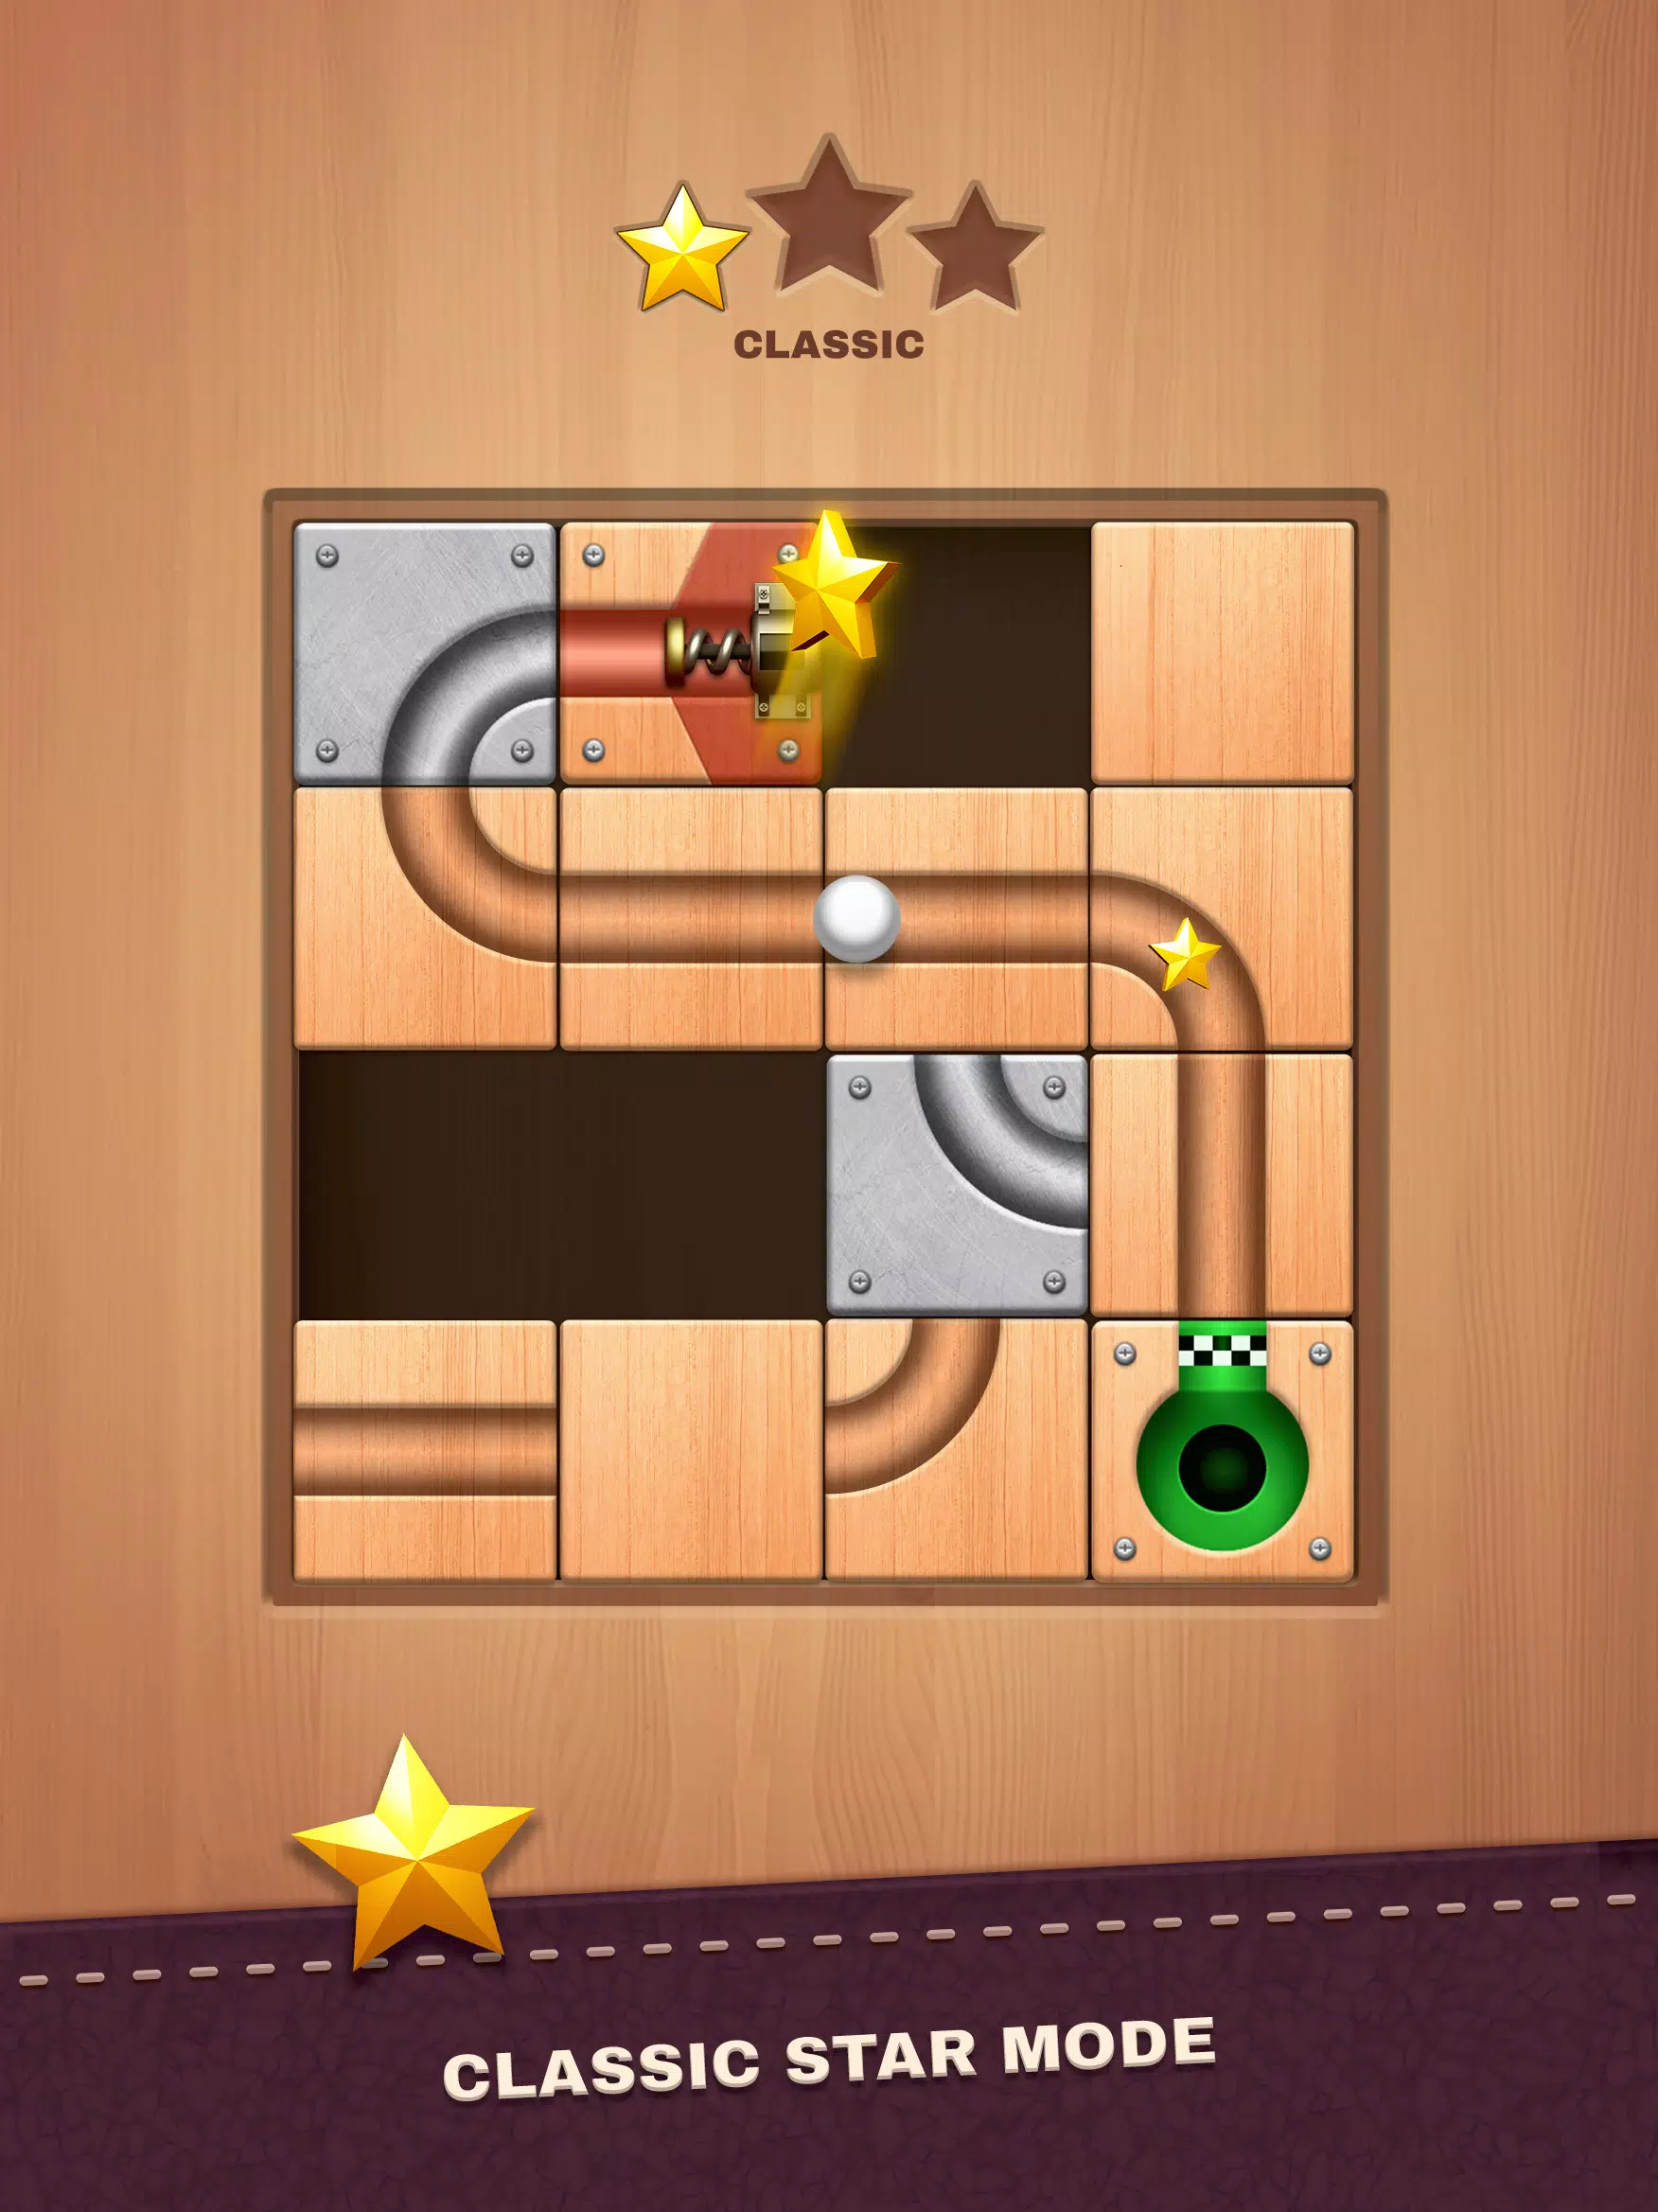 Unblock Ball - Block Puzzle - Apps on Google Play